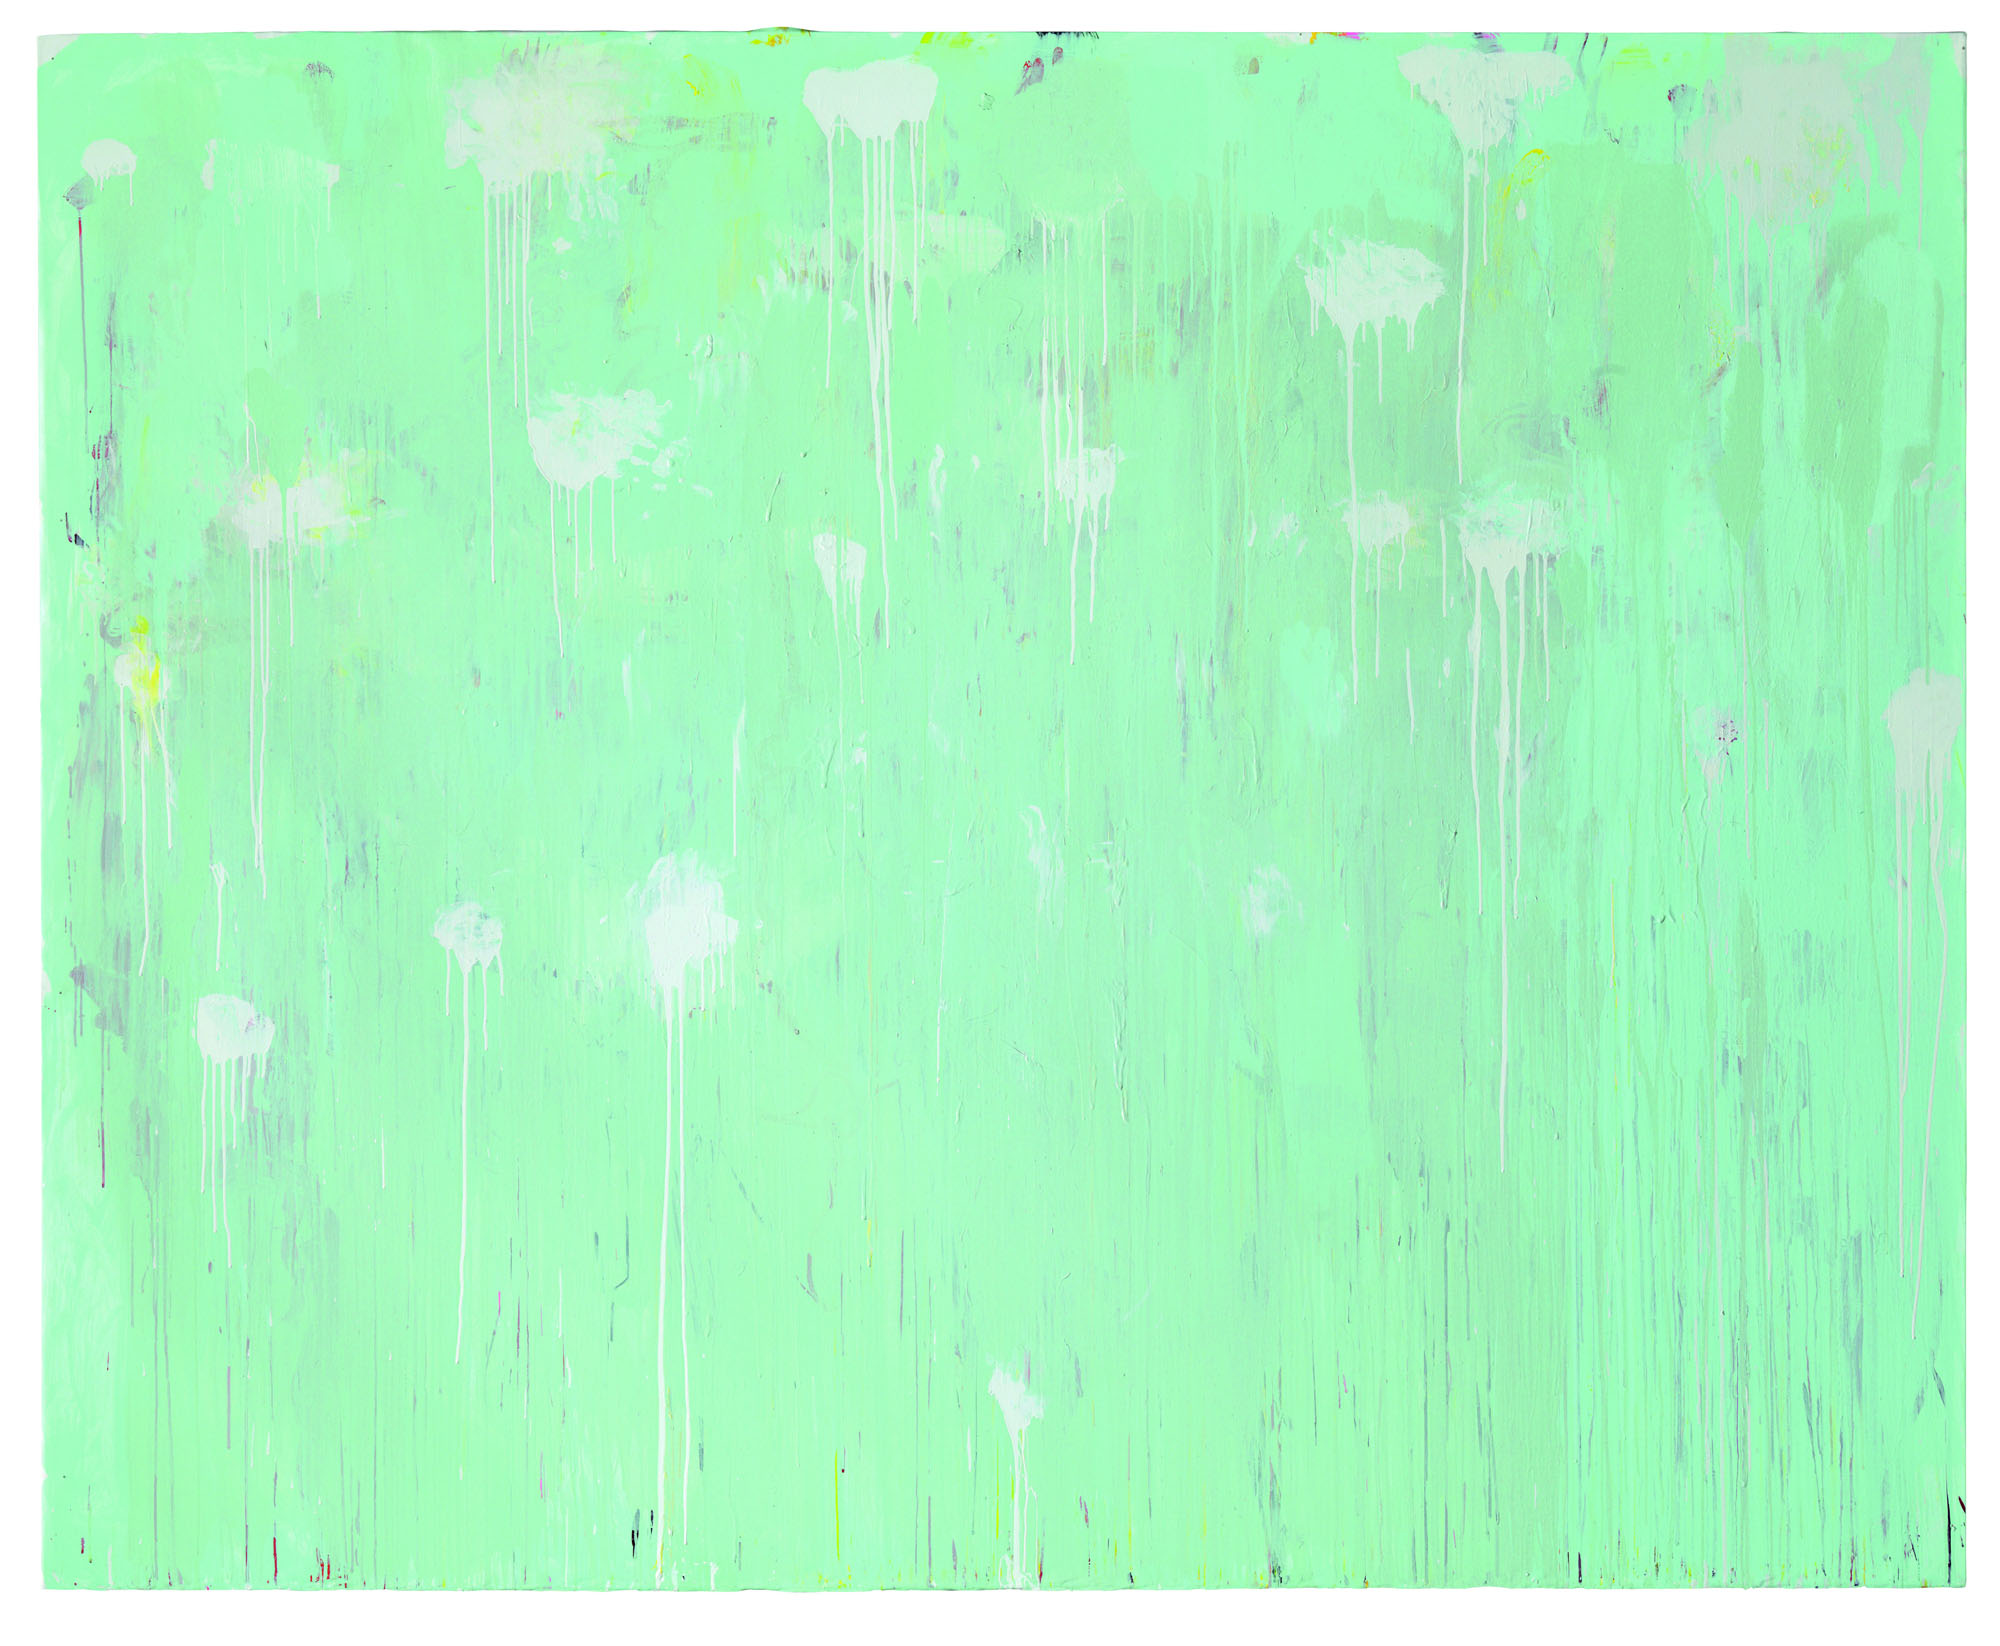 Cy Twombly (American, 1928-2011) 'Untitled, (A Gathering of Time)' 2003